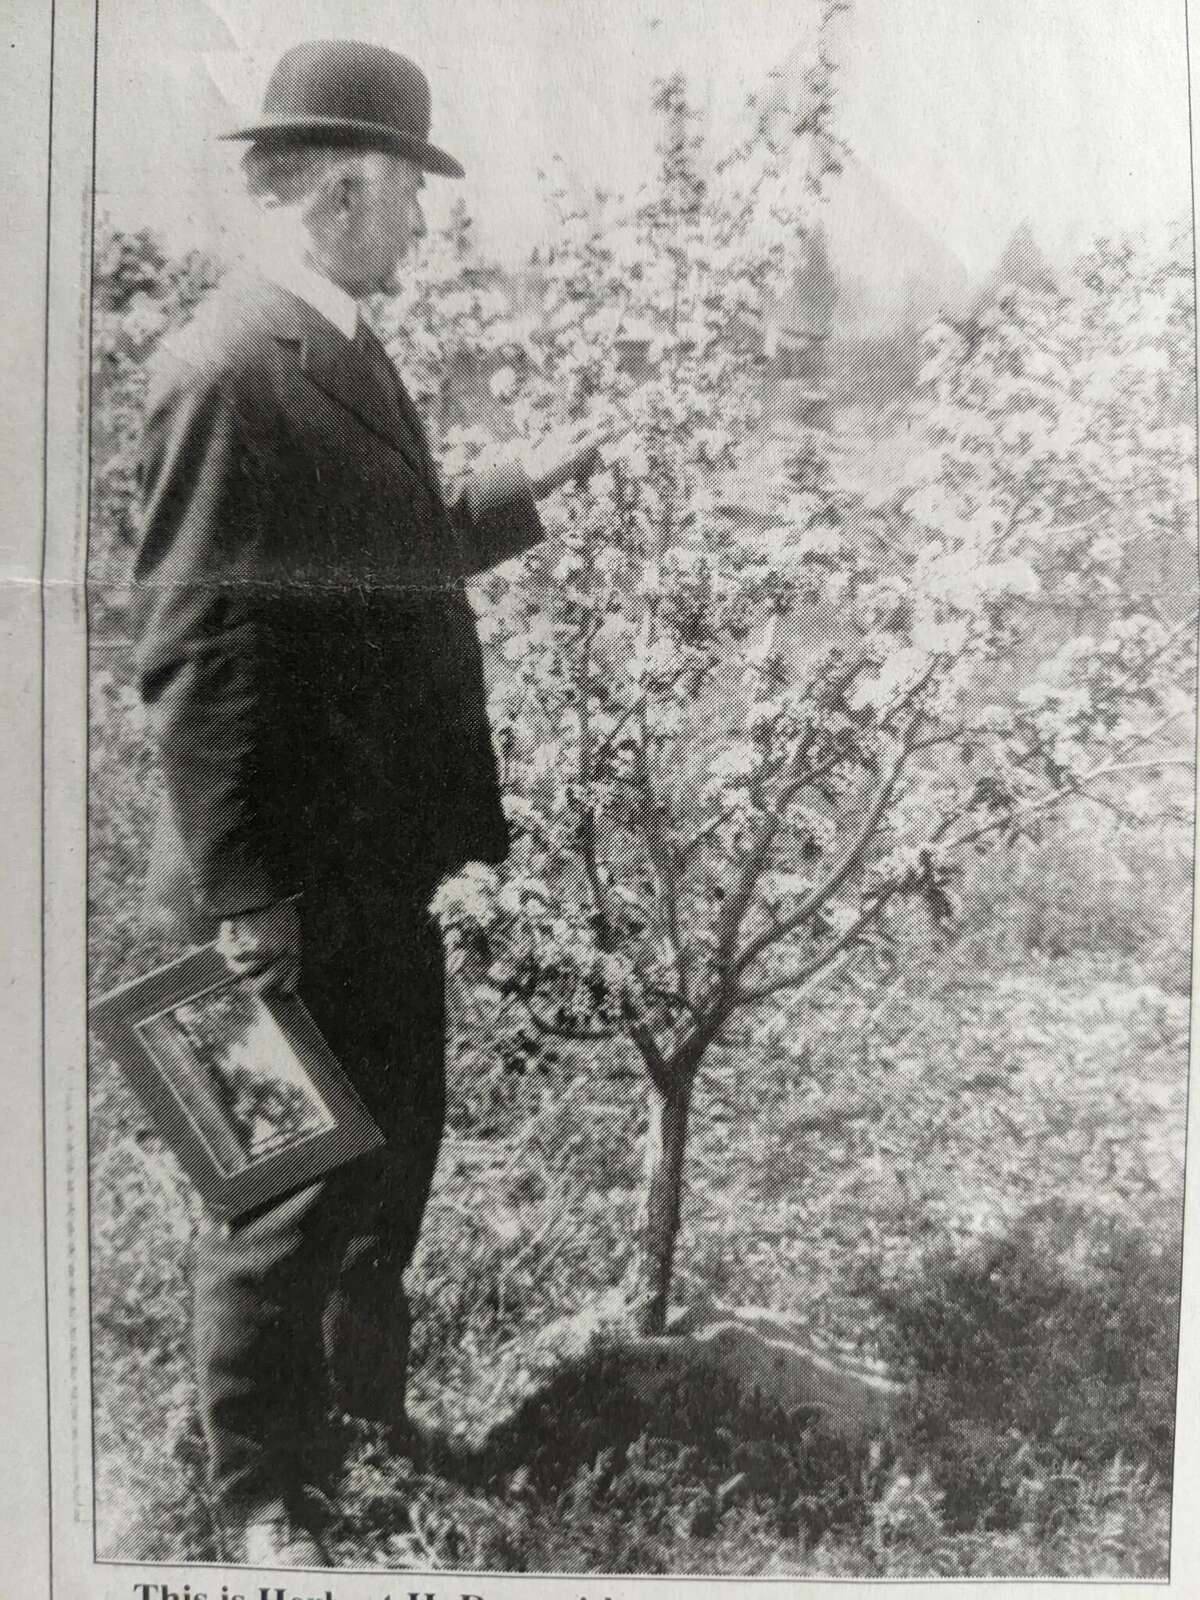 This iconic photo of Dr. Herbert Henry Dow depicts a man who made a fortune from chemicals but also, through his passion for something beautiful, gave the small town of Midland, Michigan, the masterpiece of the Dow Gardens.